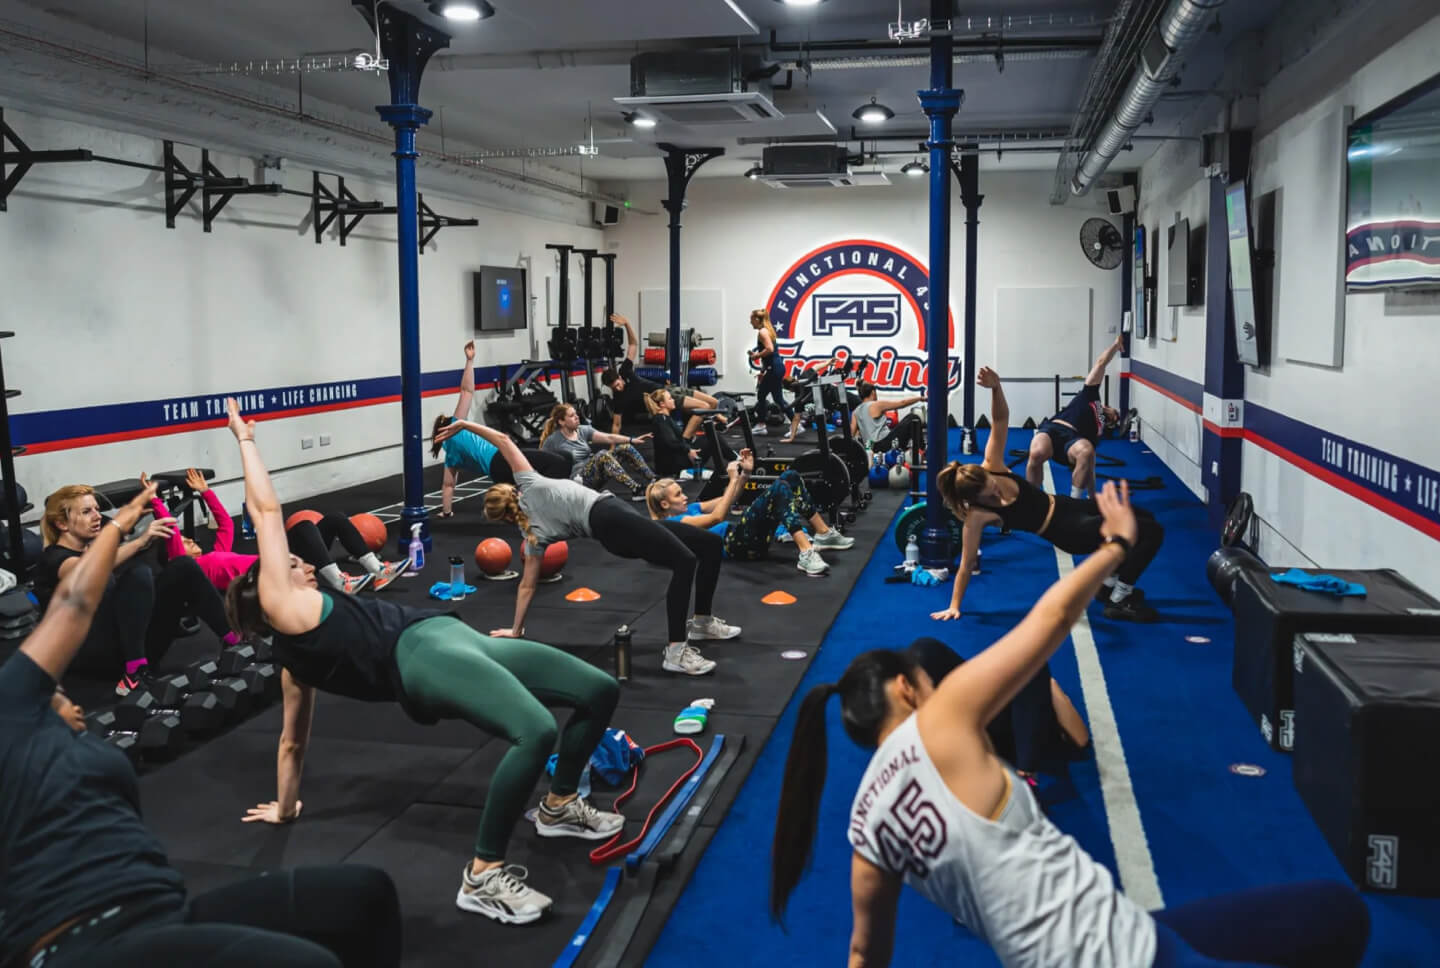 You'll love F45 if...